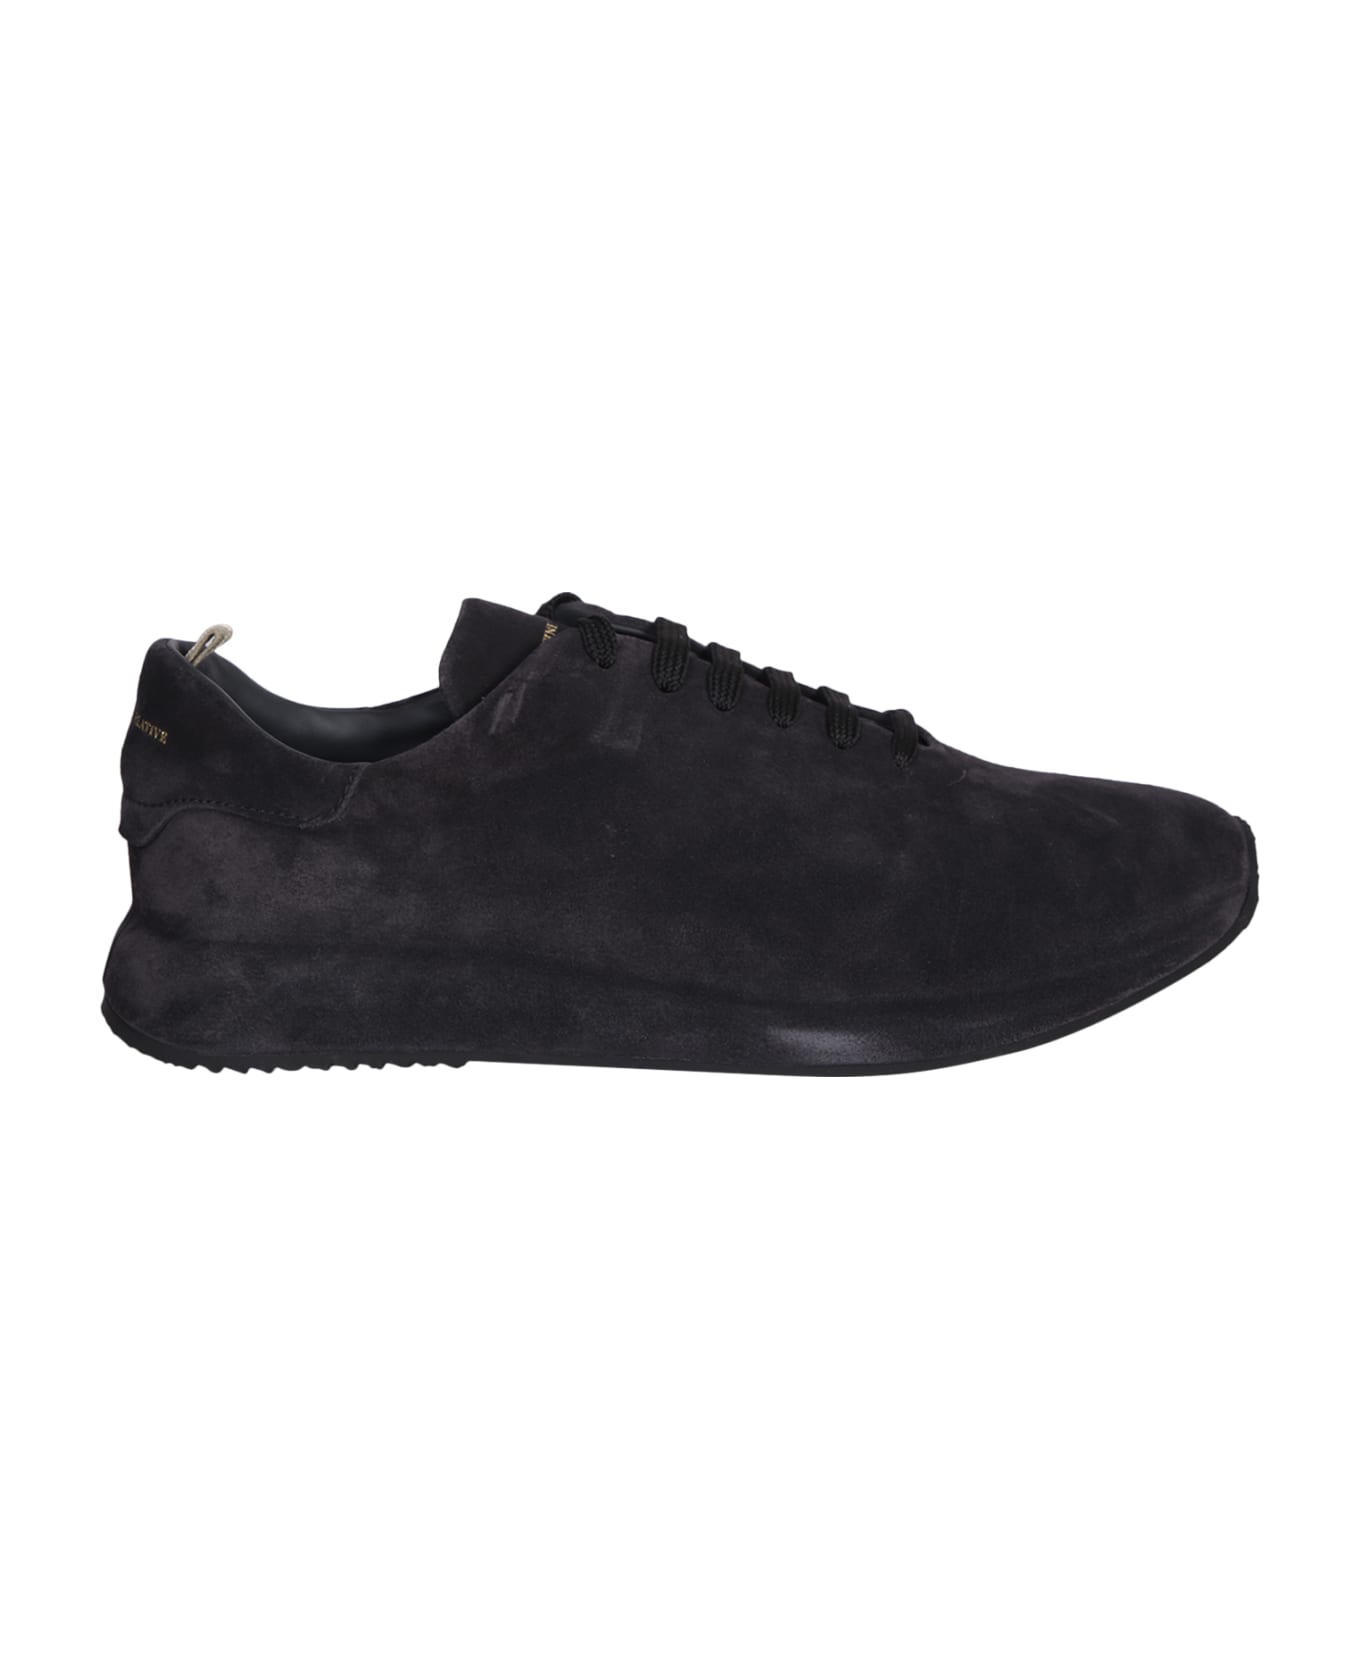 Officine Creative Race Sneakers By Officine Creative With A Contemporary Design - Black スニーカー